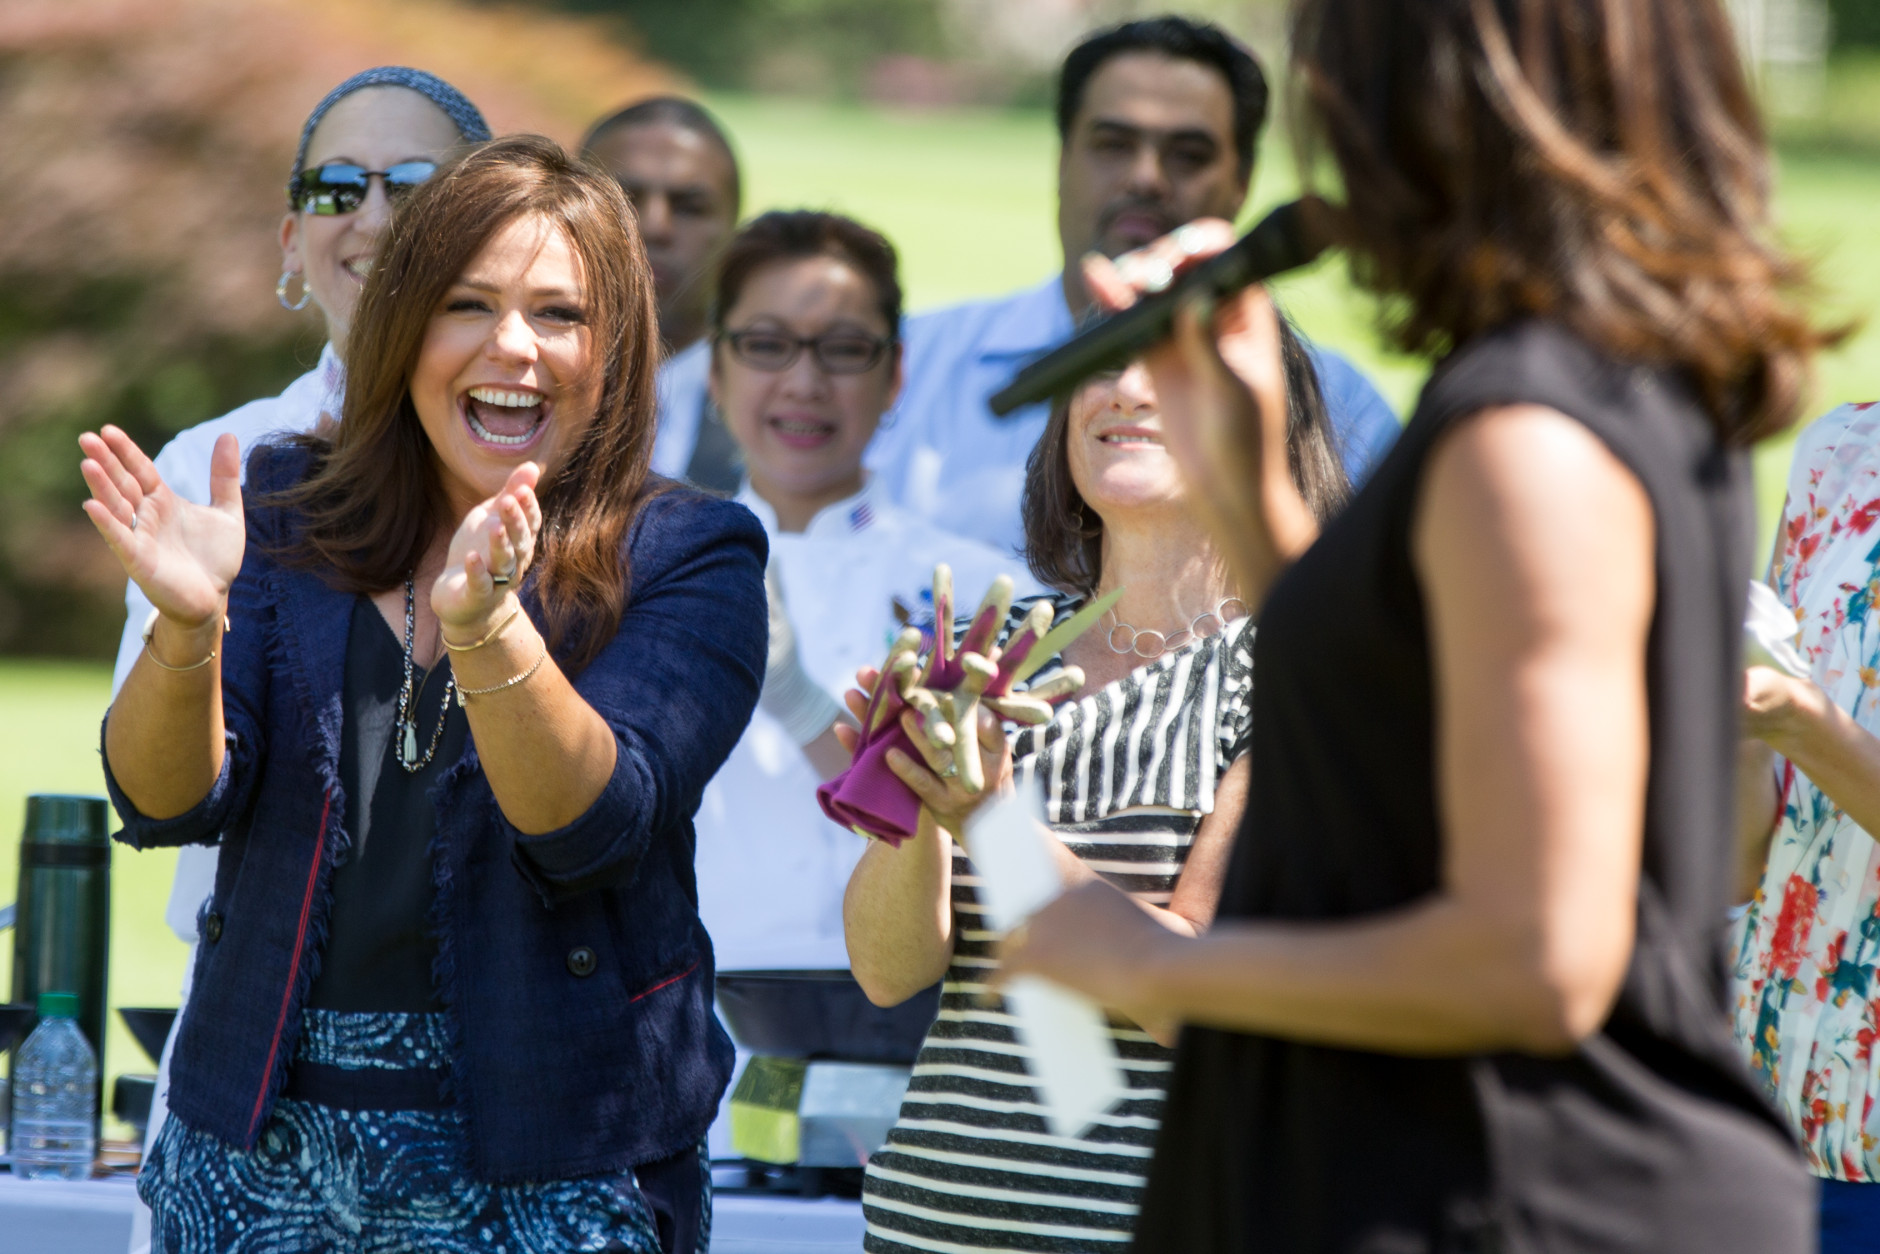 First lady Michelle Obama, foreground, joined by Rachael Ray, left, welcomes school children from across the country to harvest the White House Kitchen Garden, Monday, June 6, 2016, at the White House in Washington. (AP Photo/Andrew Harnik)